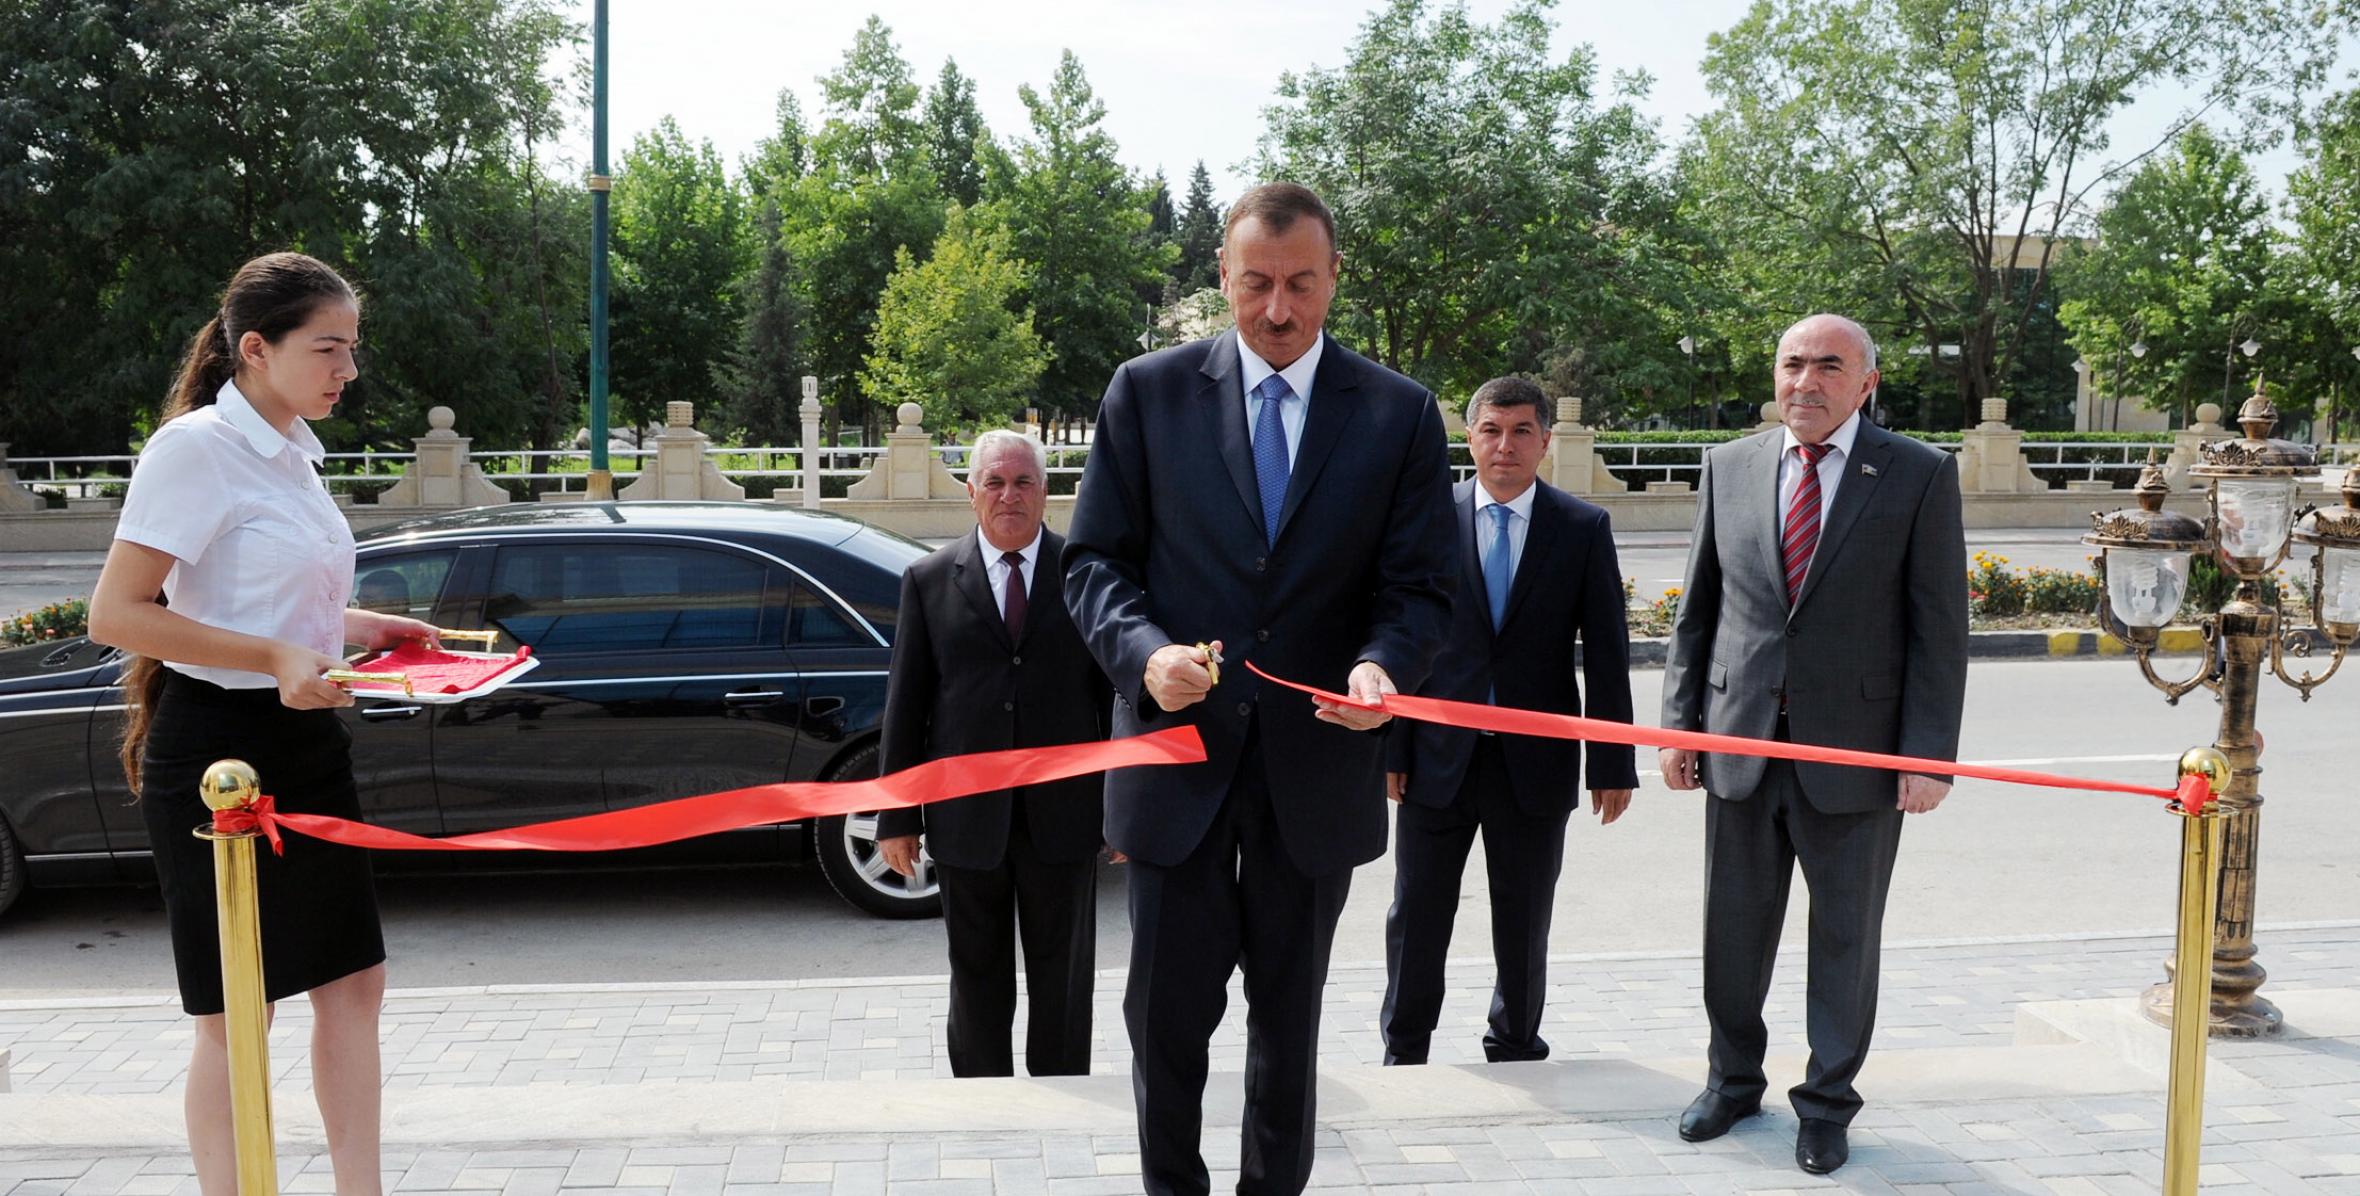 Ilham Aliyev attended the opening of an office building of the Shabran district branch of the "Yeni Azerbaijan Party"